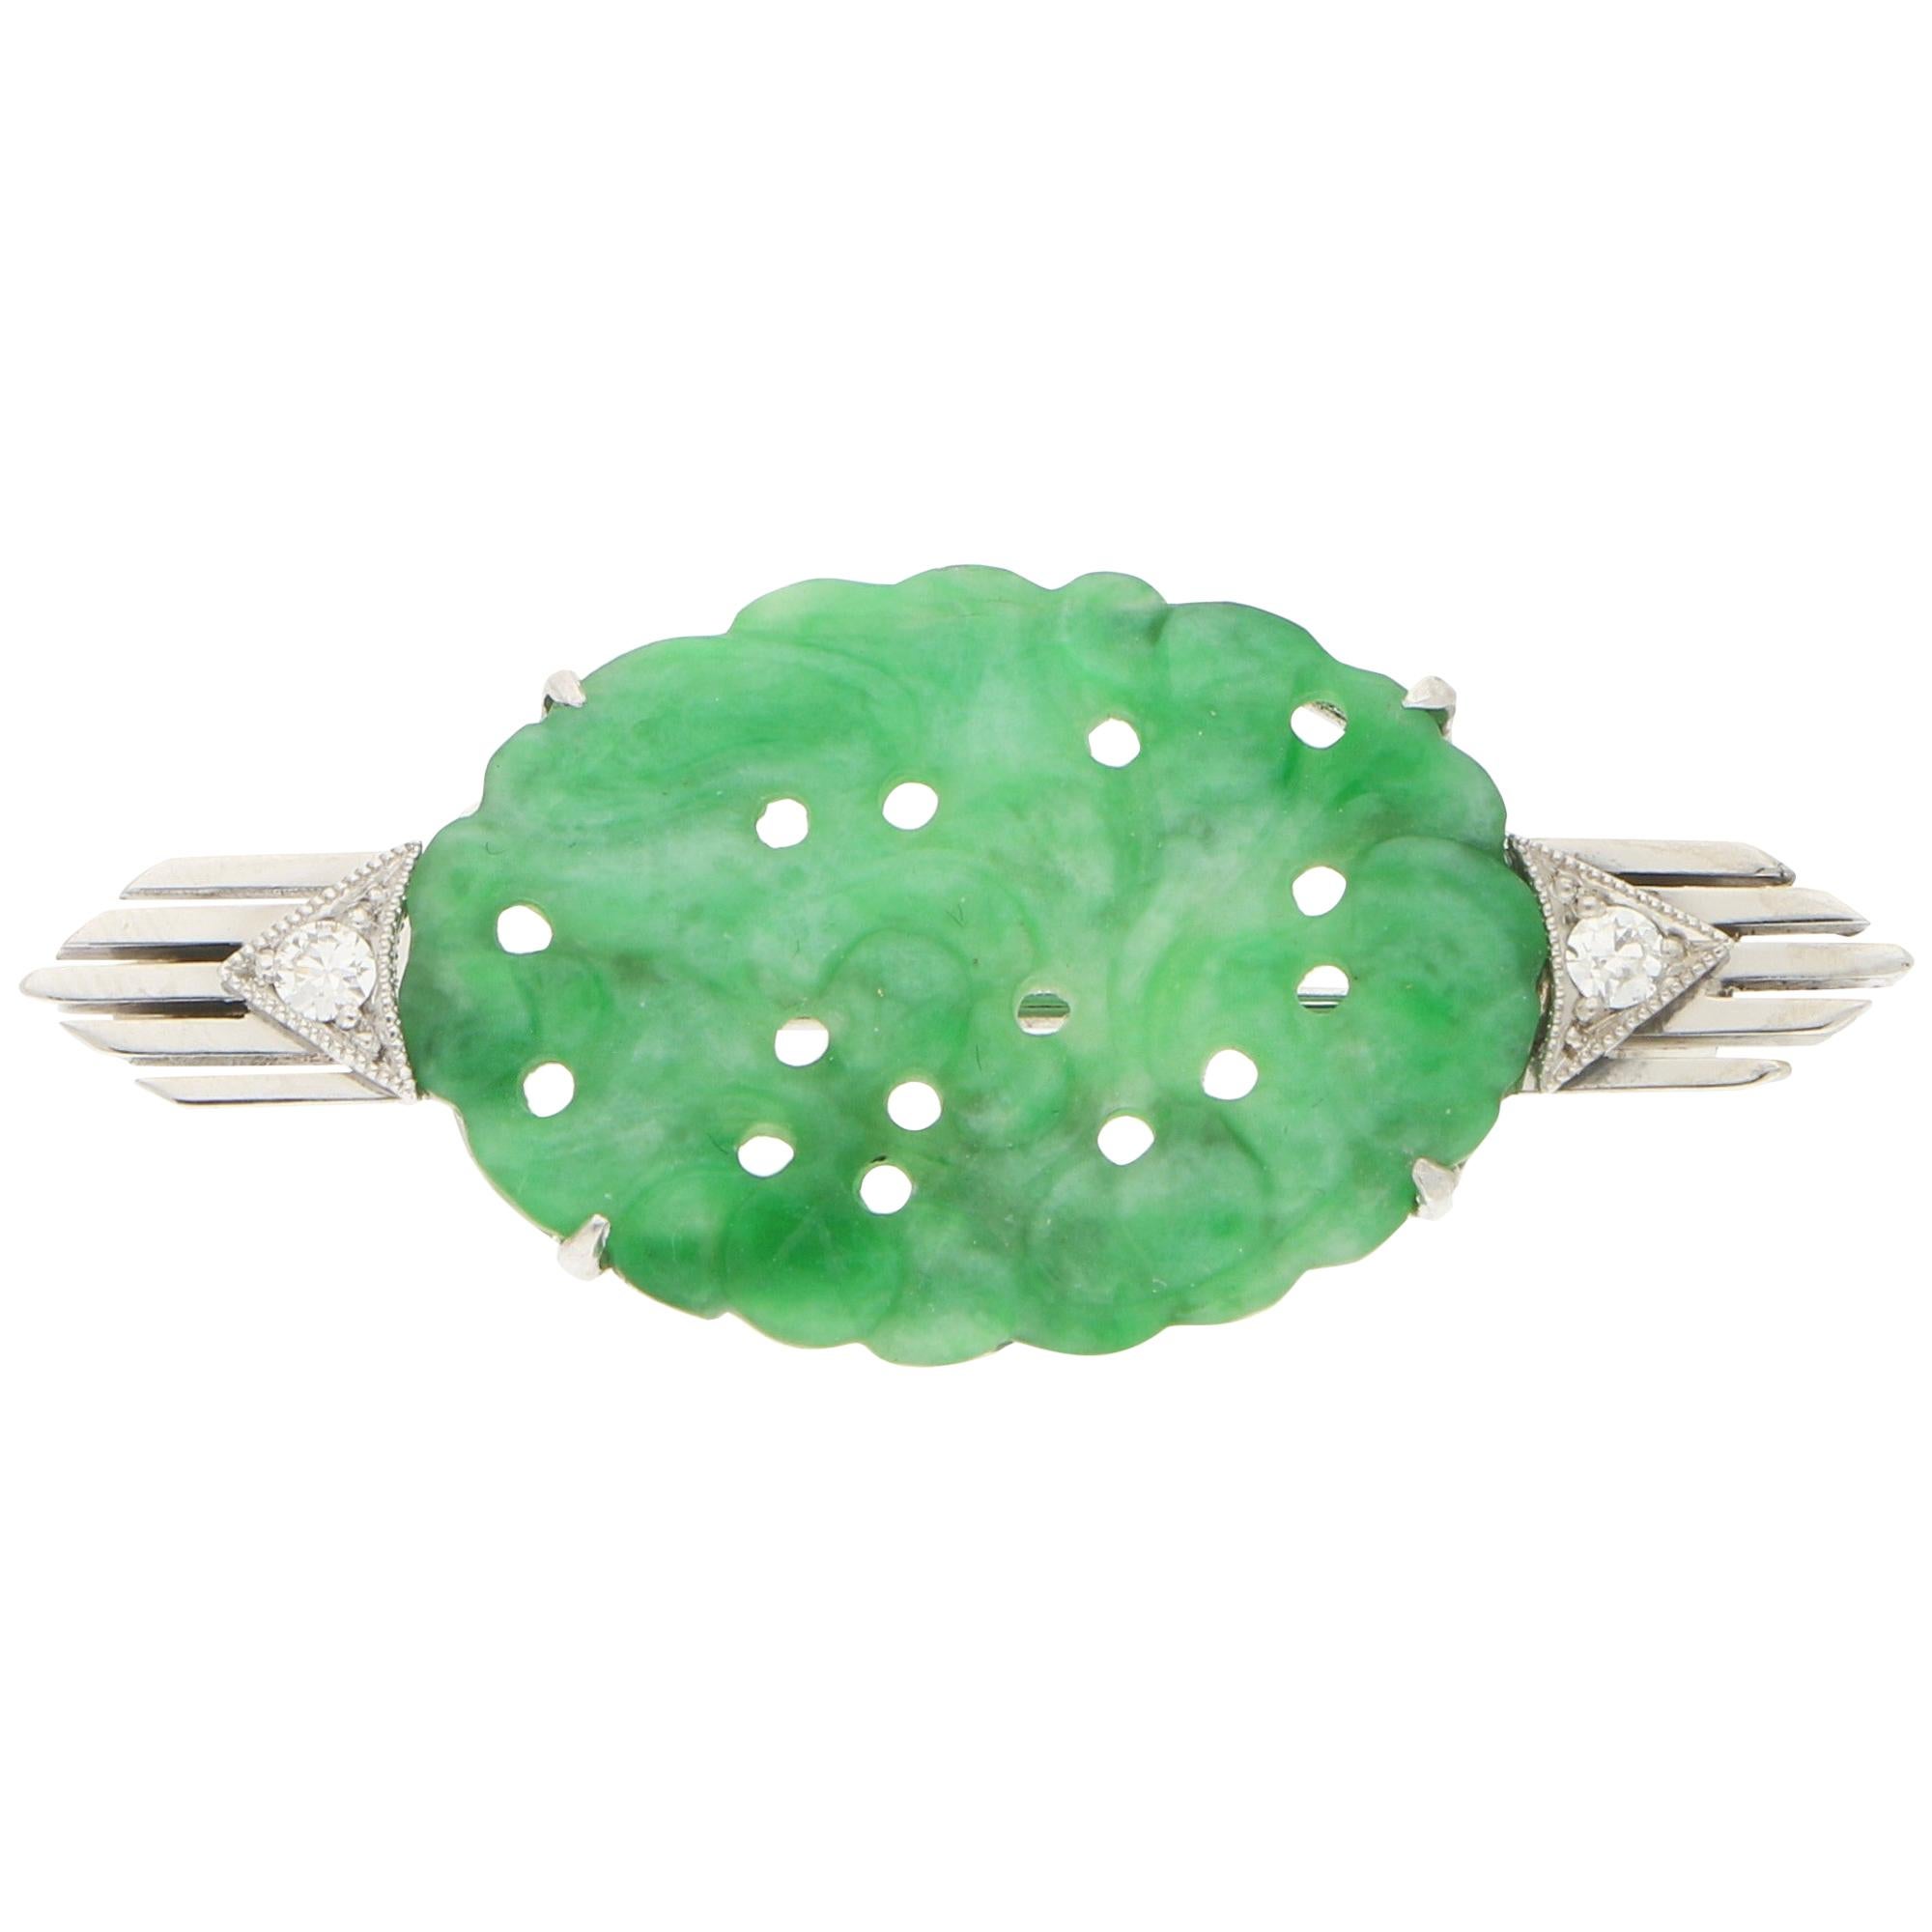 Art Deco Jade and Diamond Brooch Pin Set in White Gold and Platinum